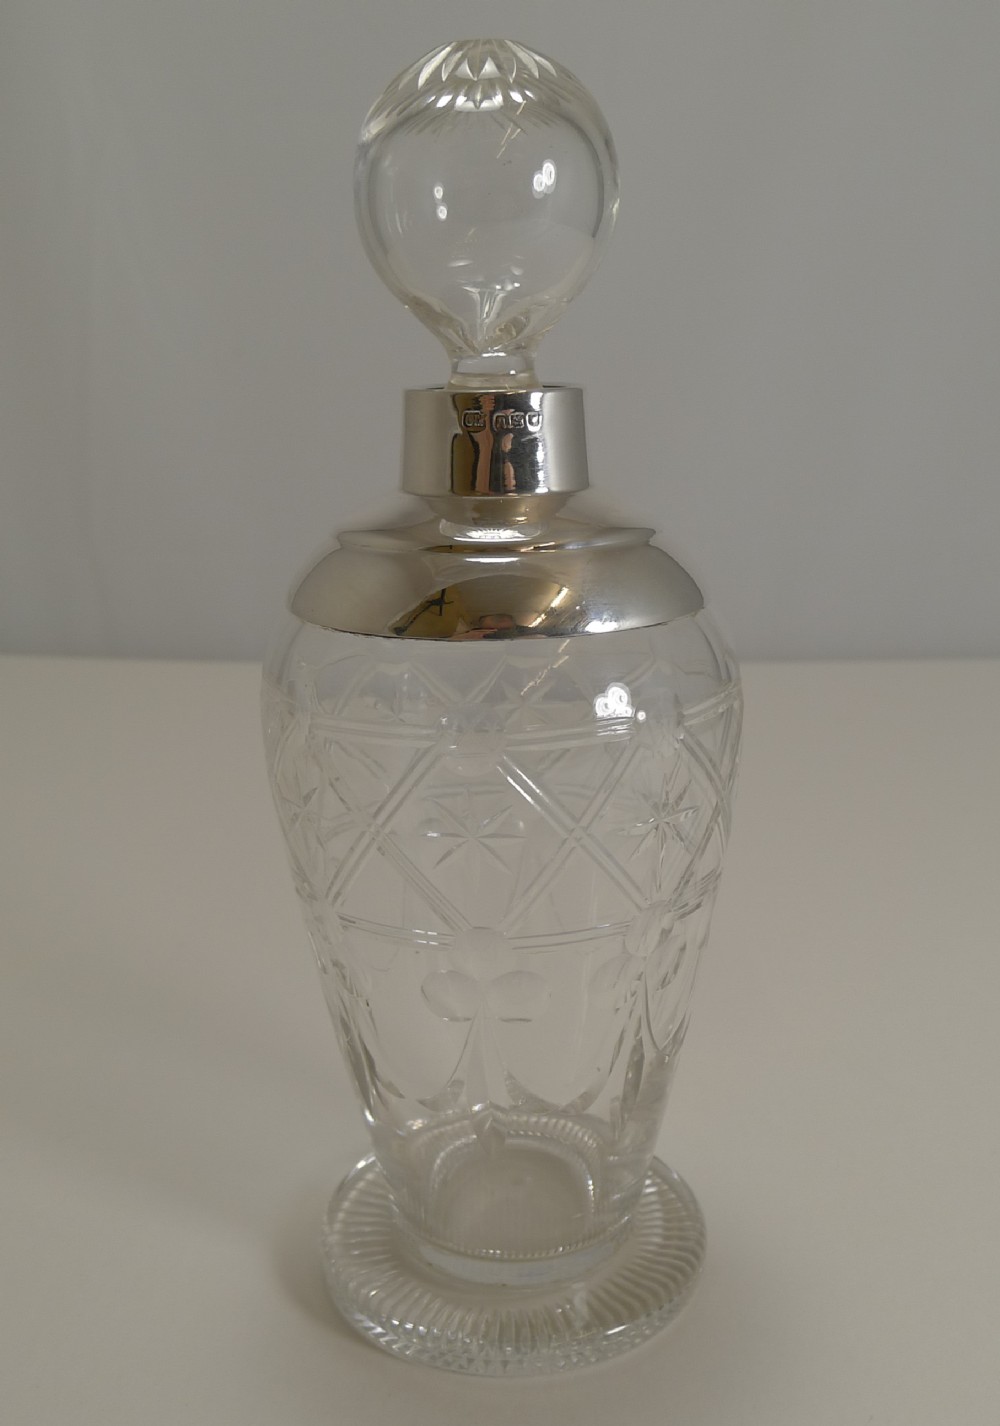 antique english sterling silver mounted perfume bottle 1915